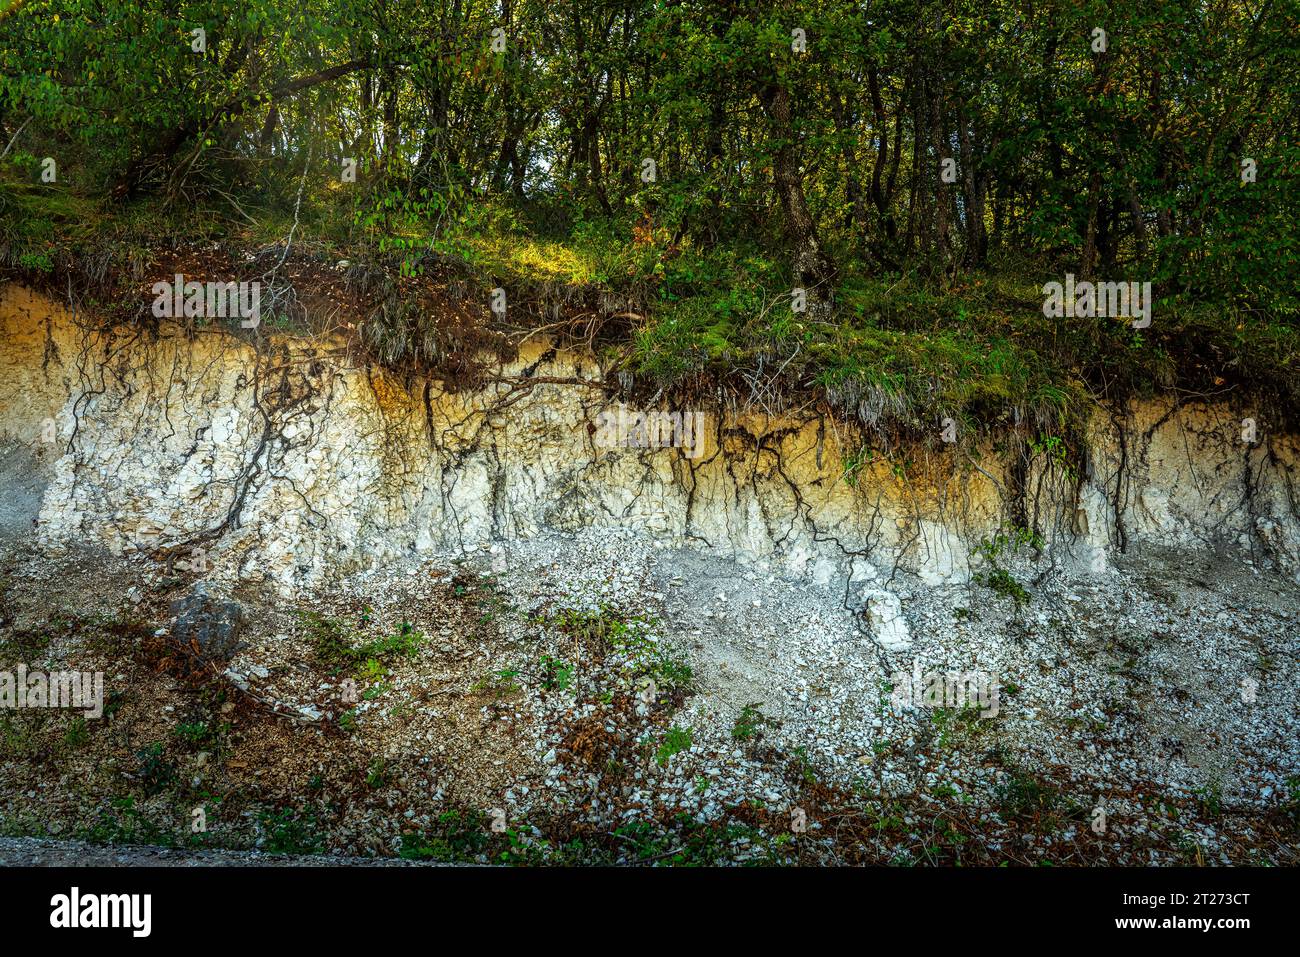 Soil erosion exposes plant roots and vegetation to the open air. Sirente Regional Park, Abruzzo, Italy, Europe Stock Photo